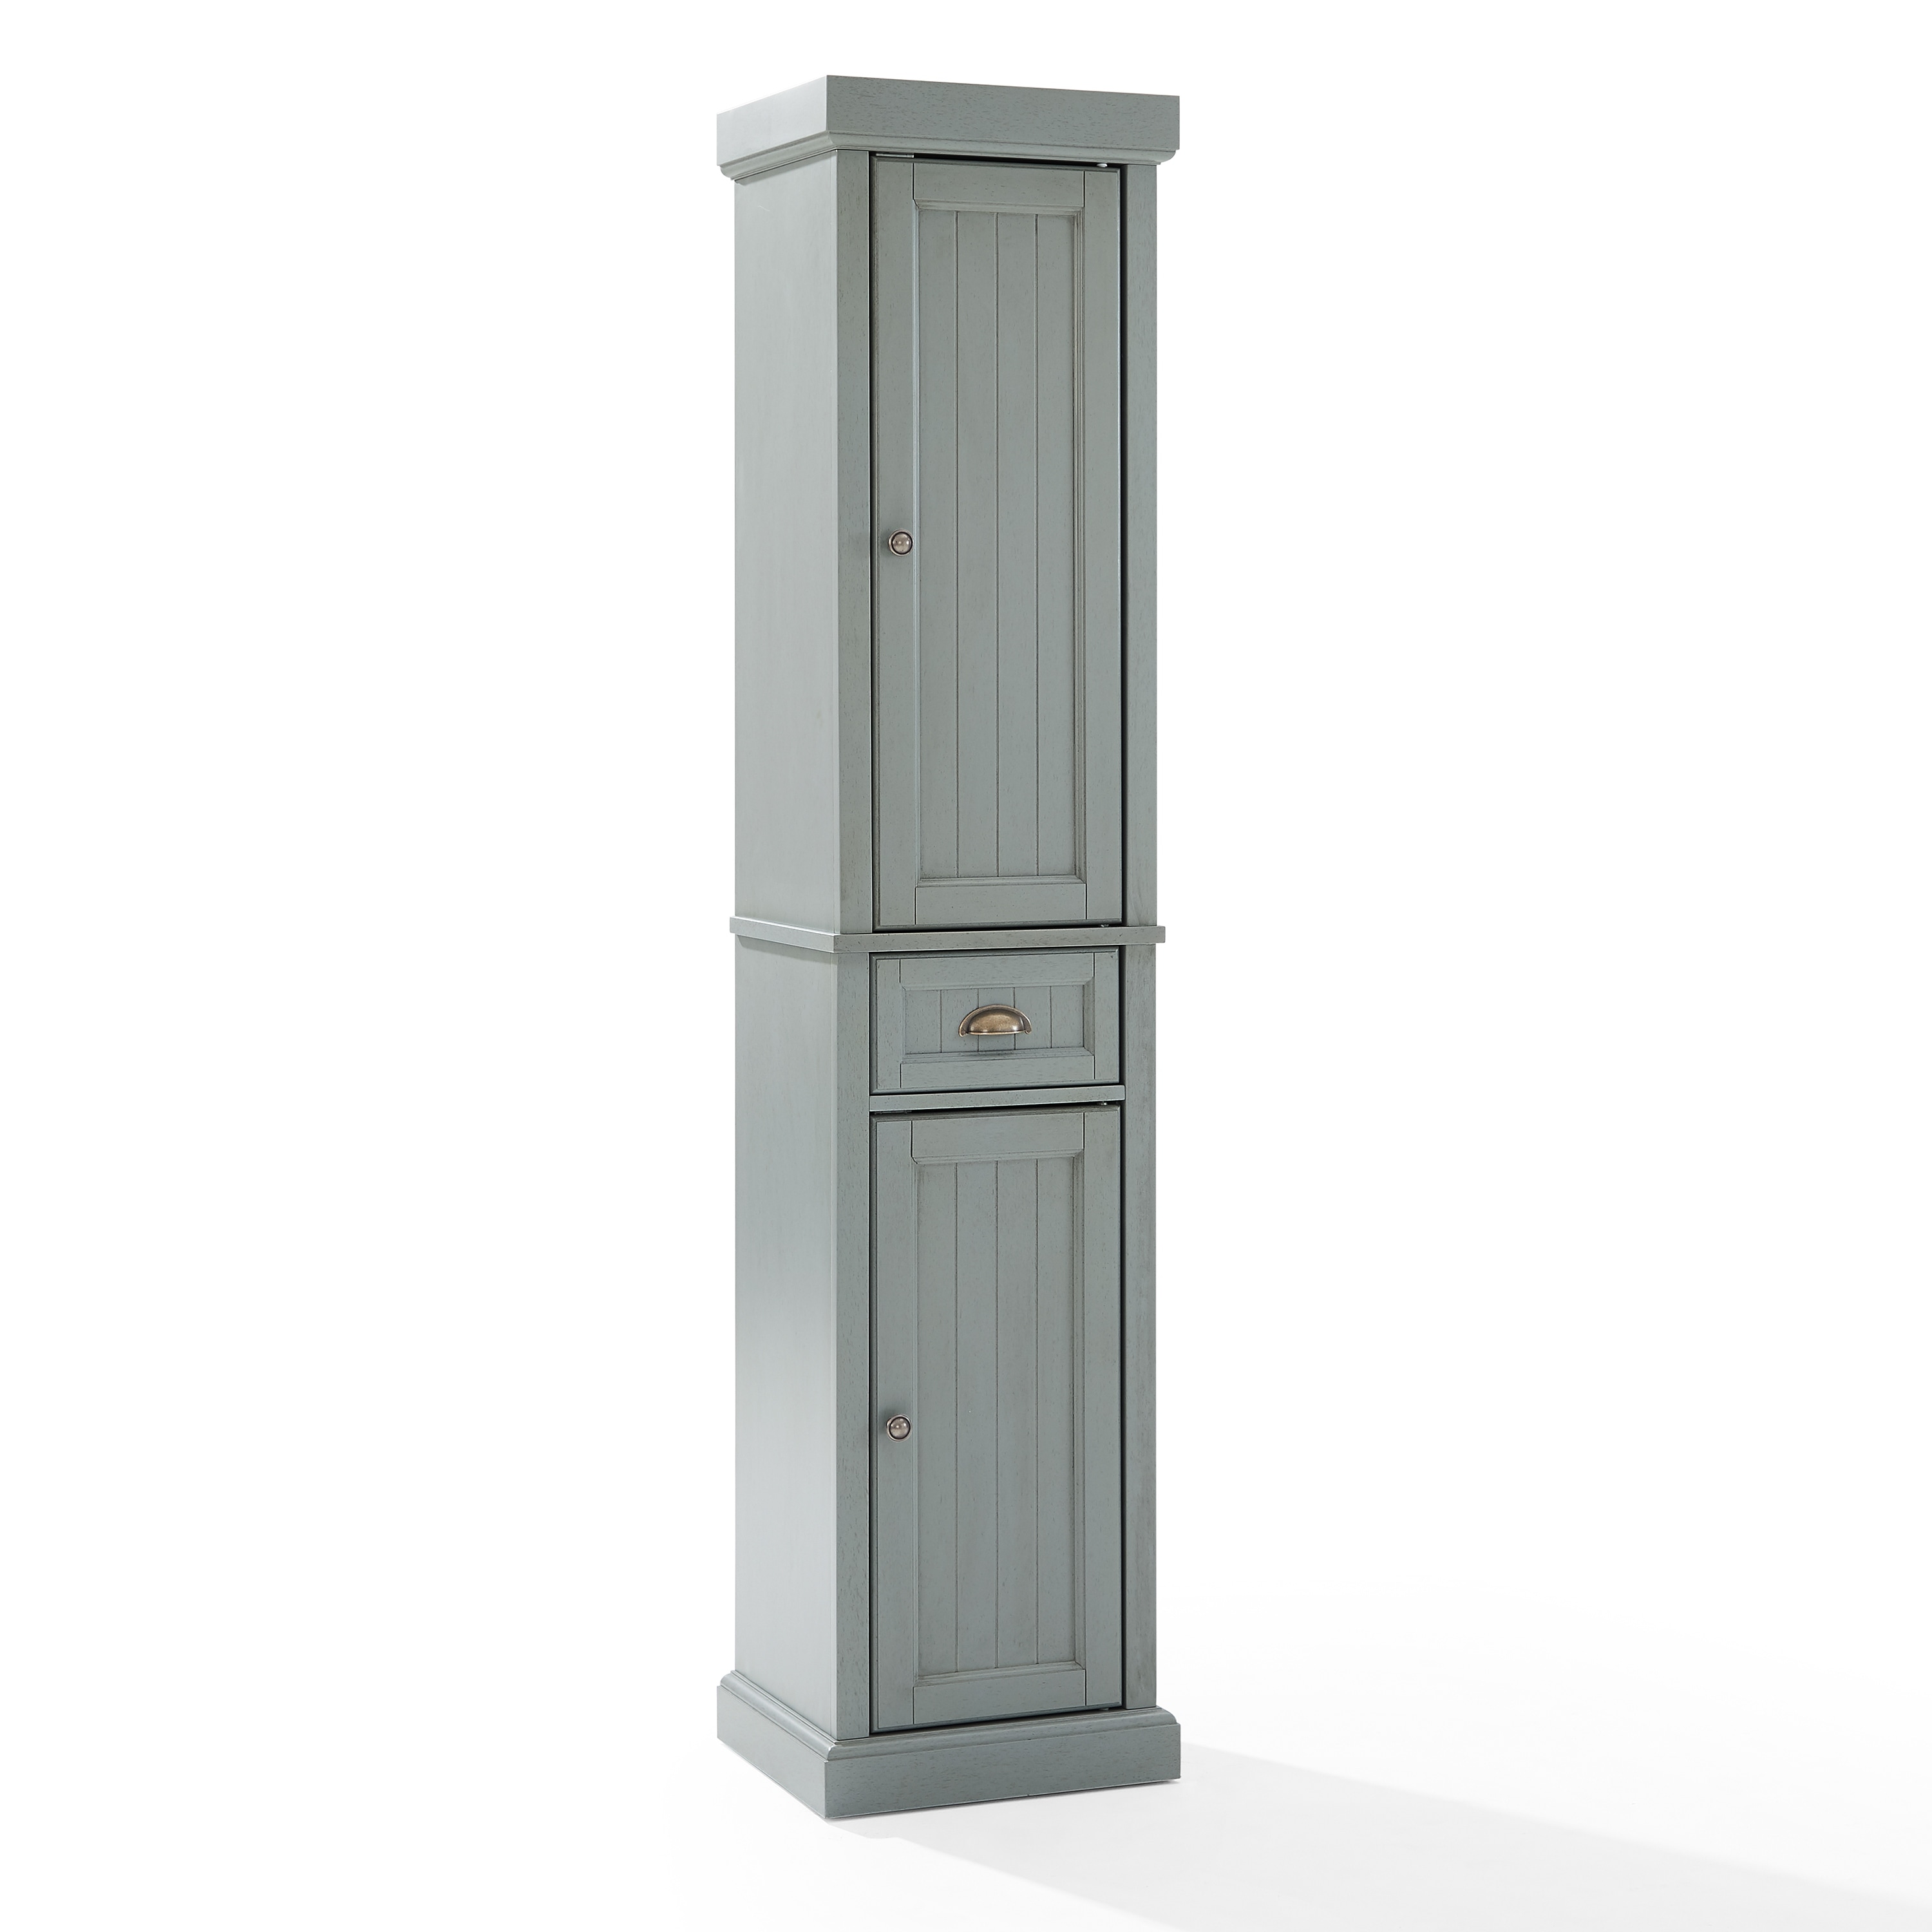 https://ak1.ostkcdn.com/images/products/is/images/direct/51d731d2a6cce1205e9db5d09df160b628cbae0a/Seaside-Tall-Linen-Cabinet.jpg